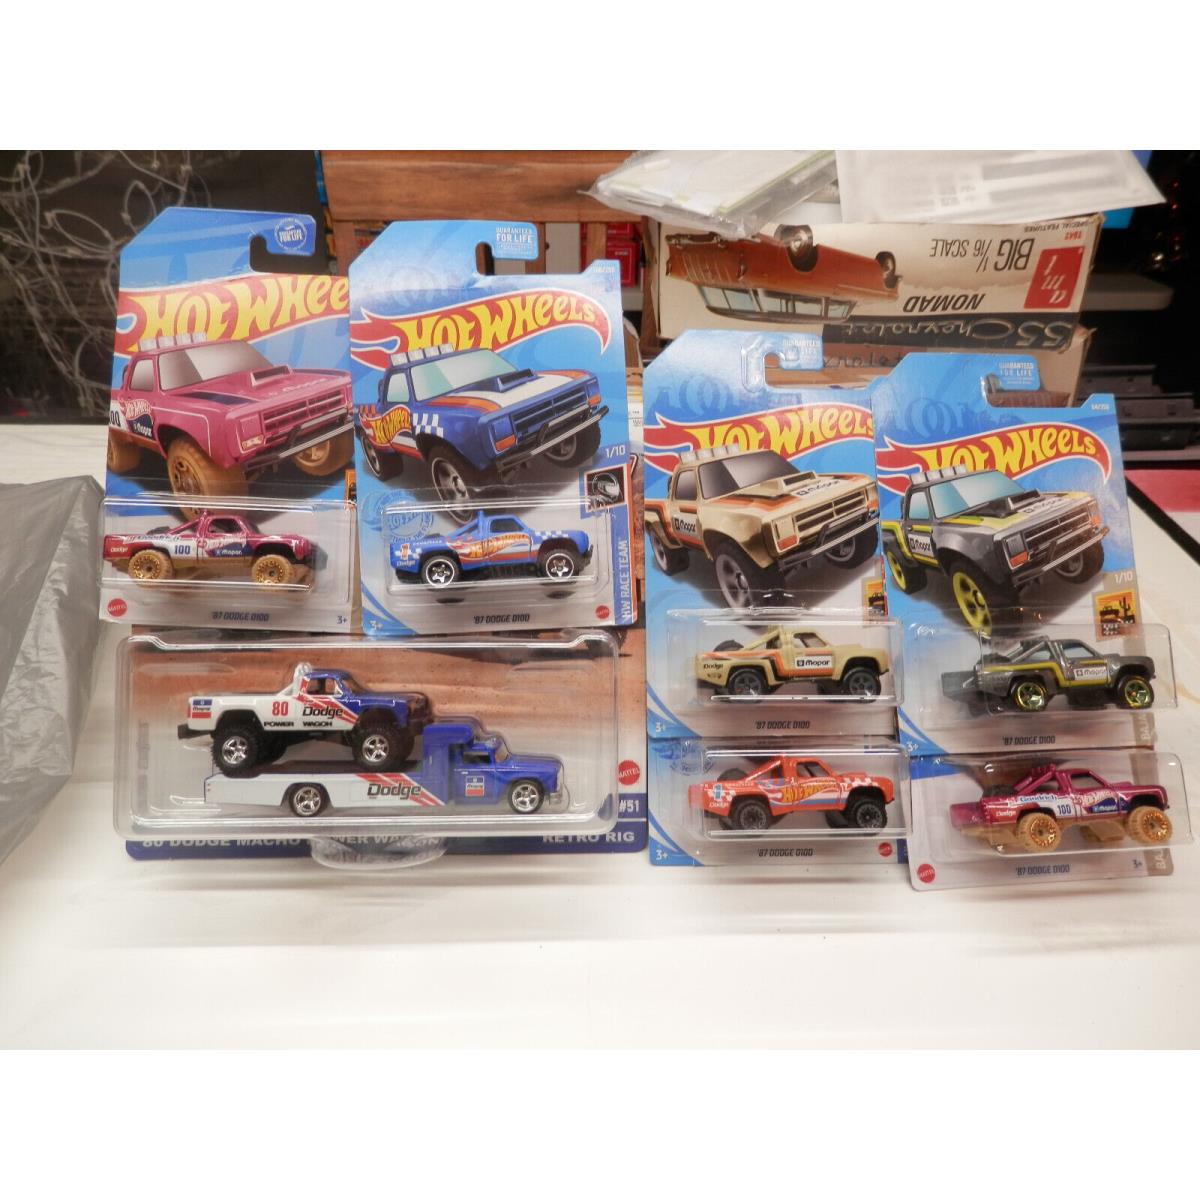 Hot Wheels dodge80 Macho Power Wagon and Set of 7 87 d100 and Teal Not in Pic n5